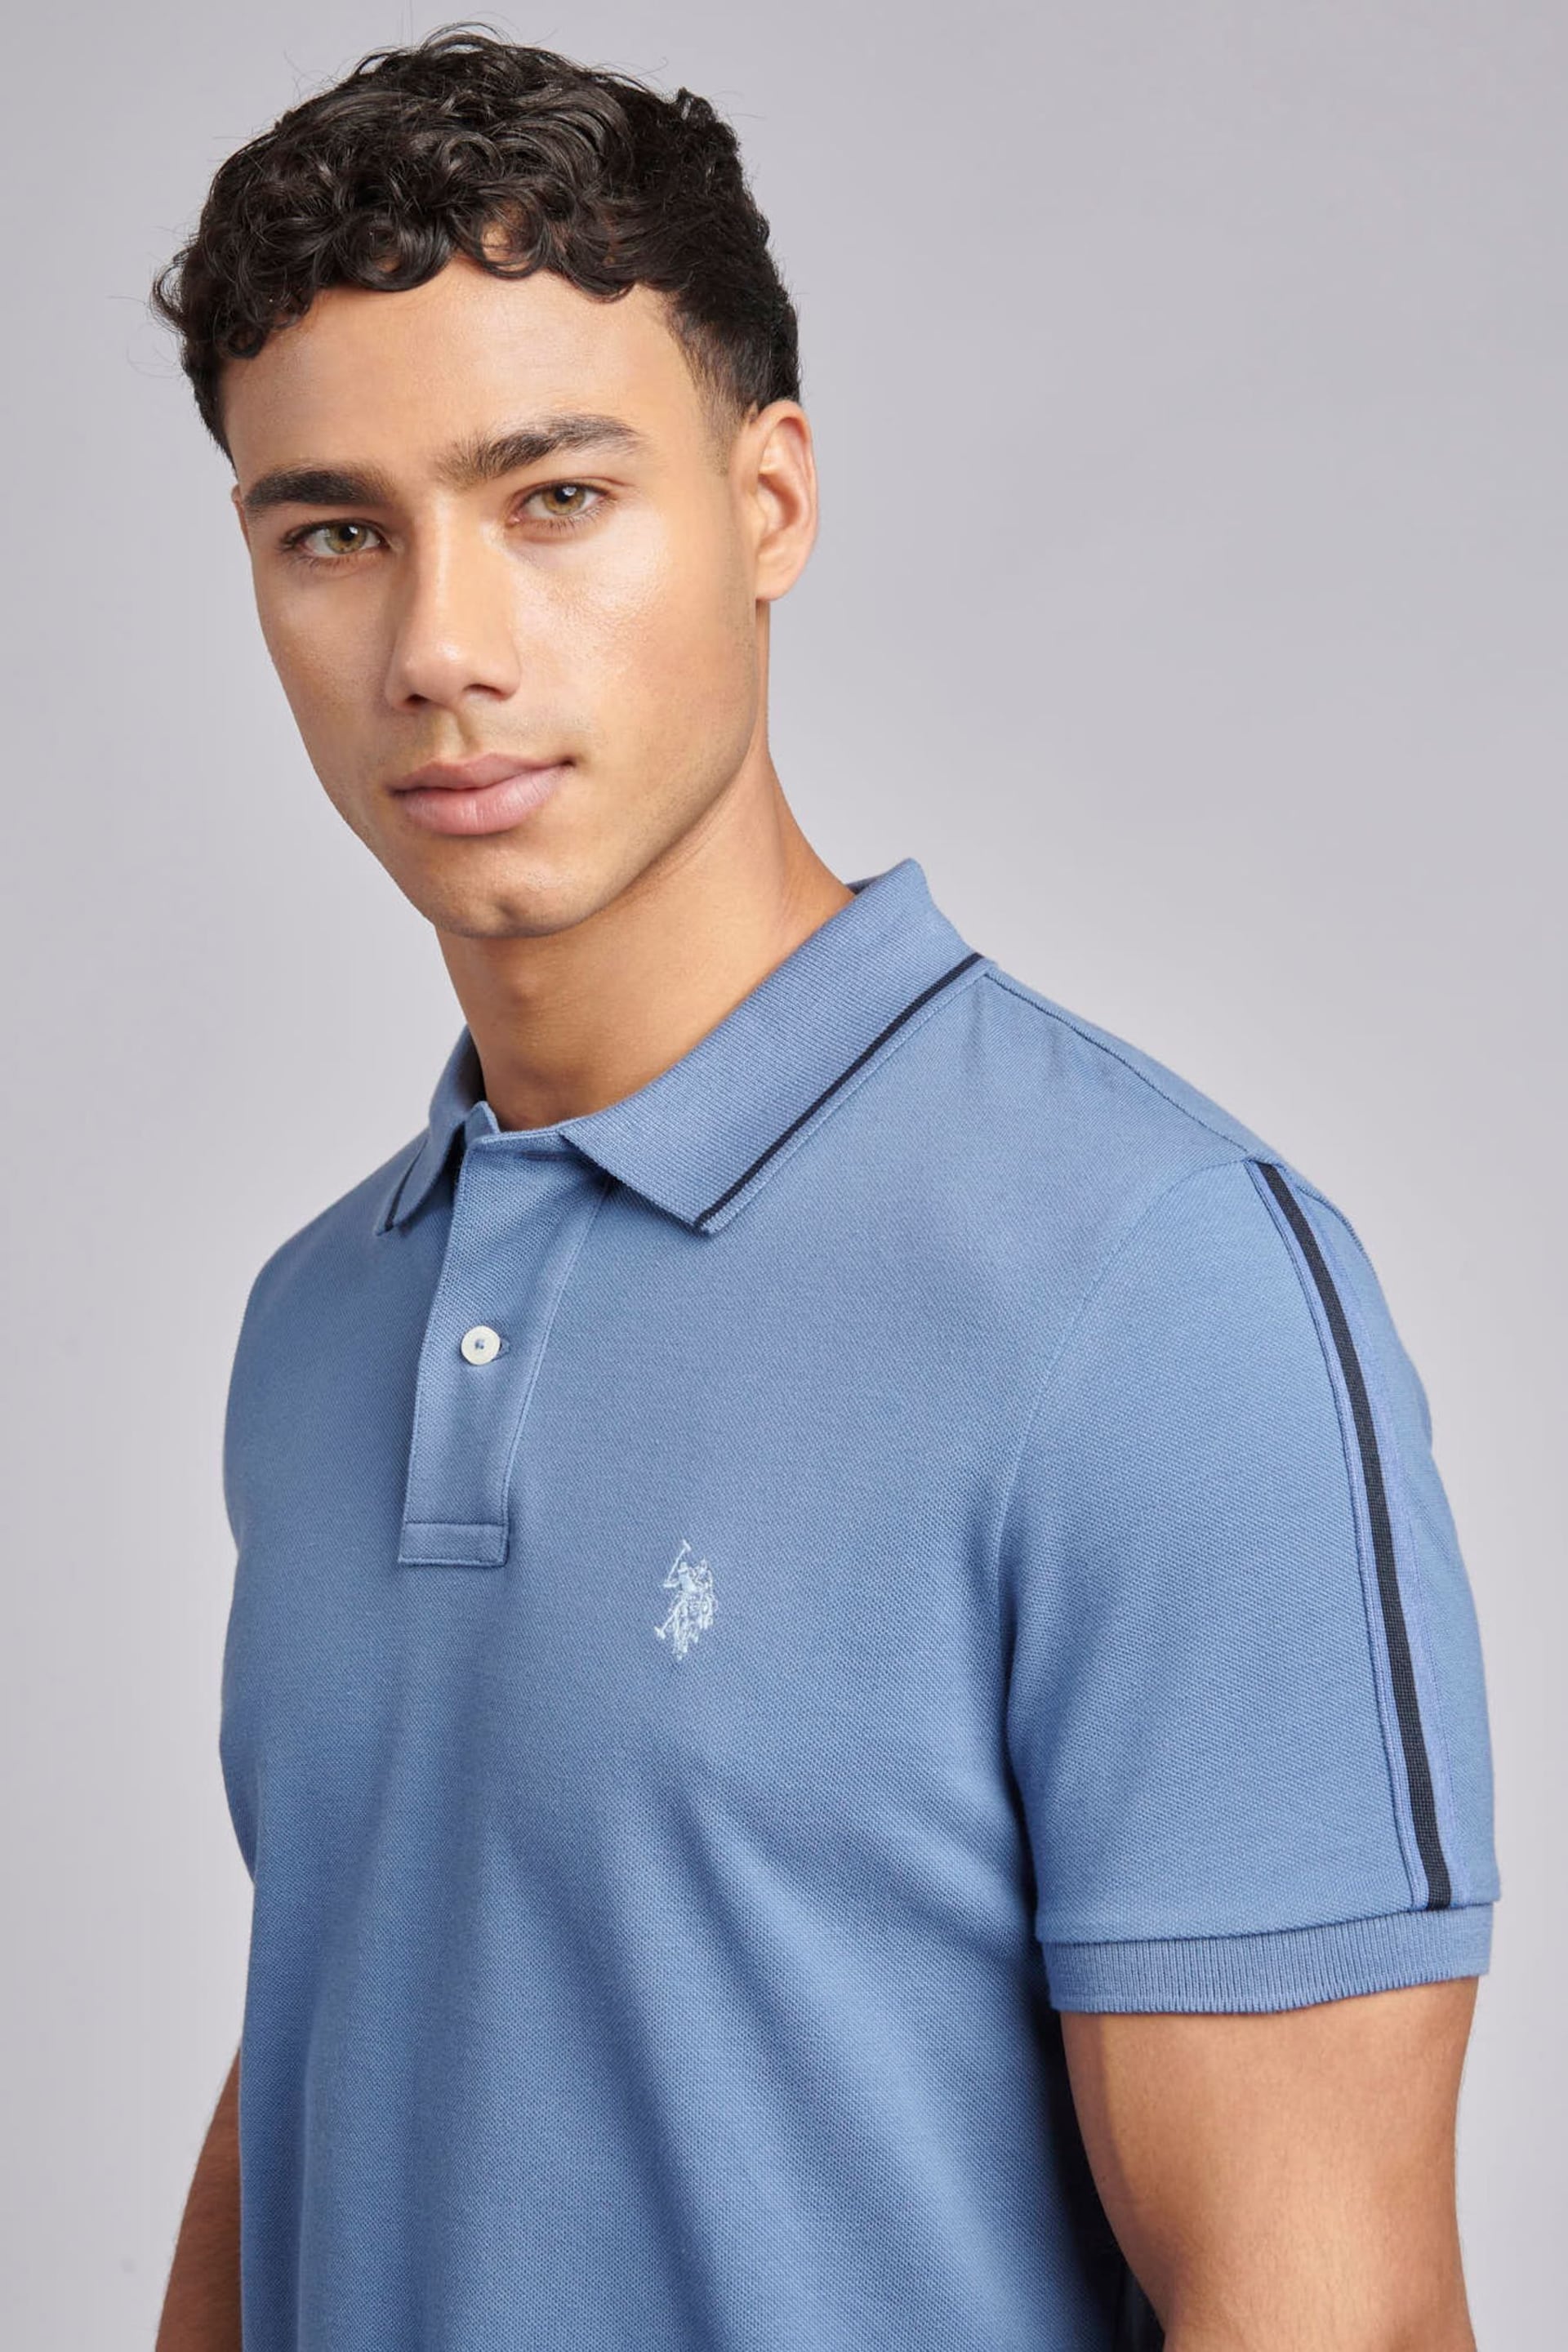 U.S. Polo Assn. Mens Blue Regular Fit Taped Polo Shirt - Image 4 of 7